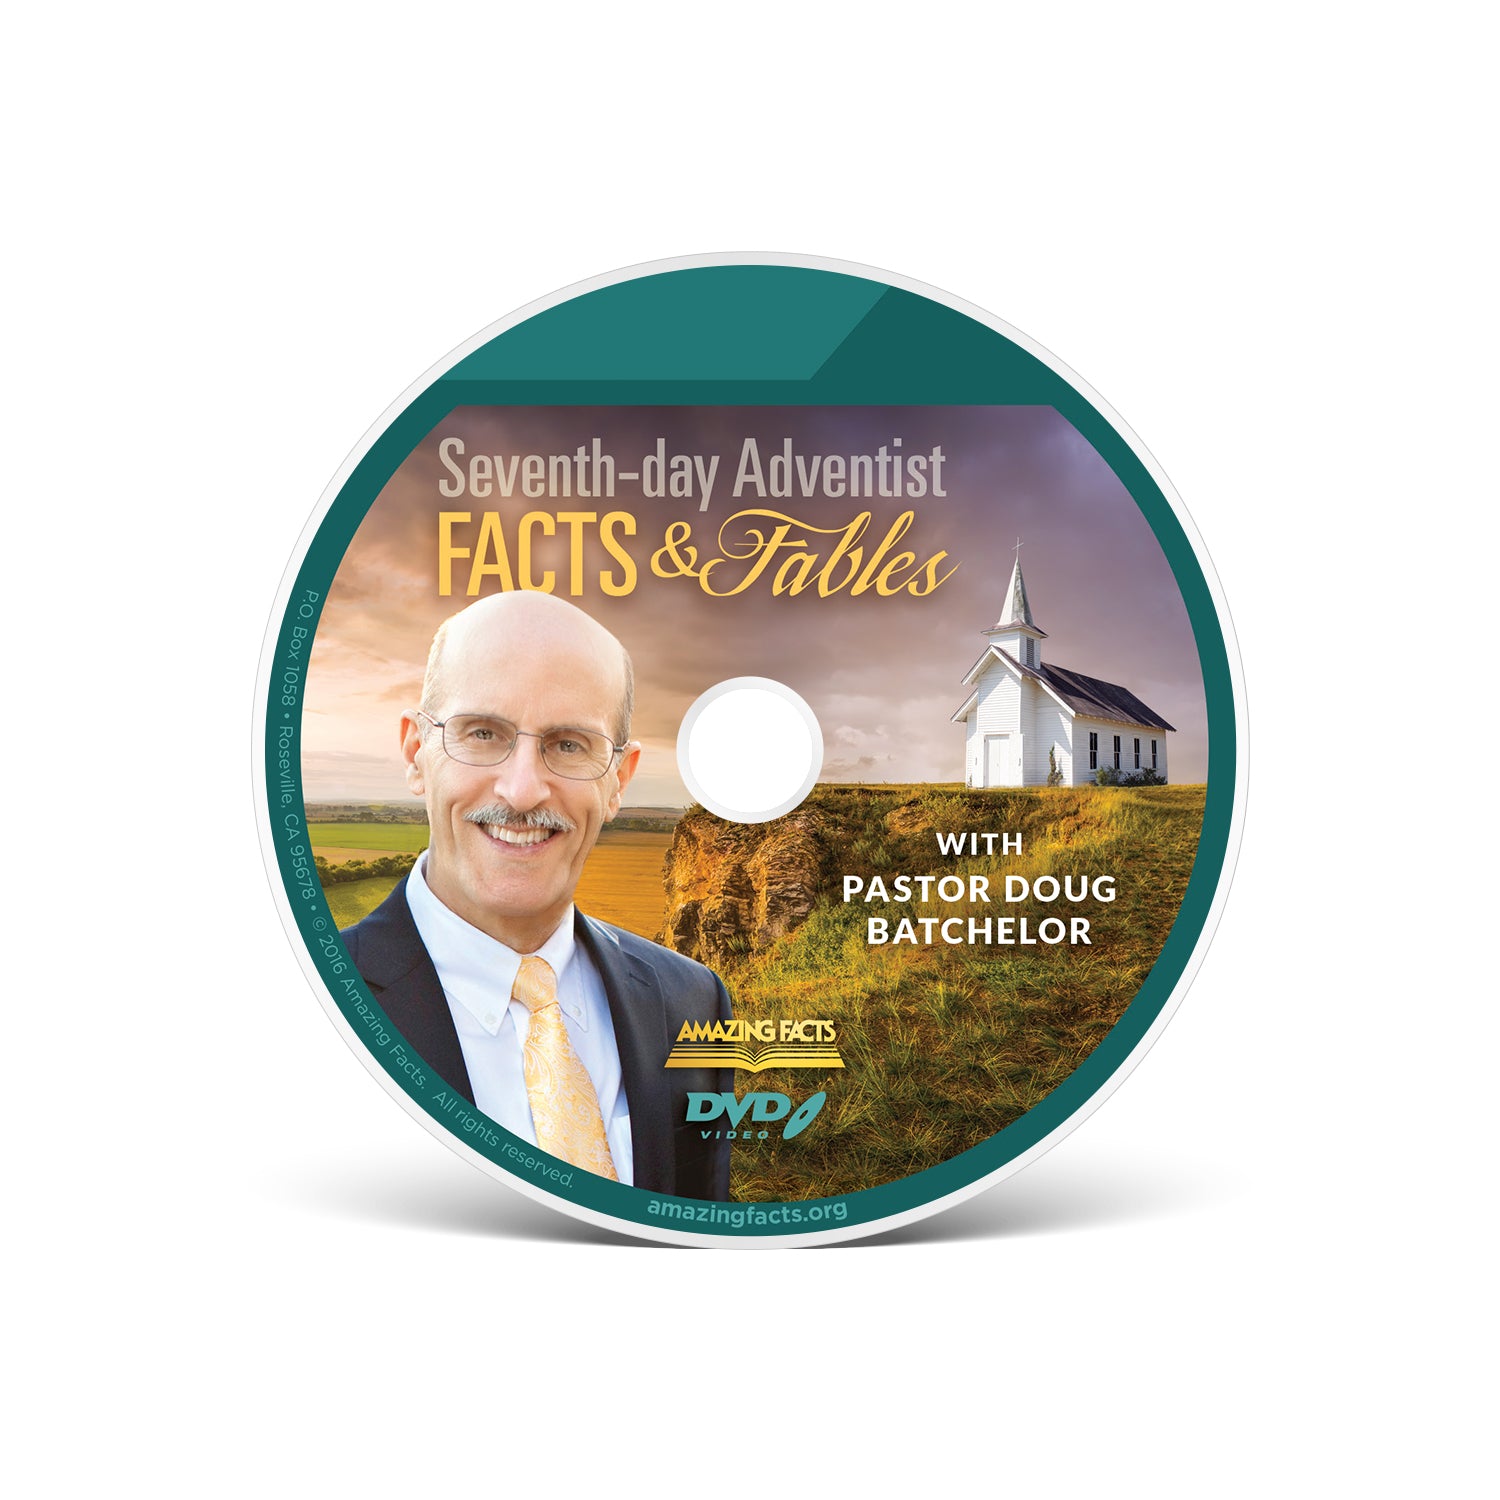 Seventh-day Adventist: Facts & Fables by Doug Batchelor